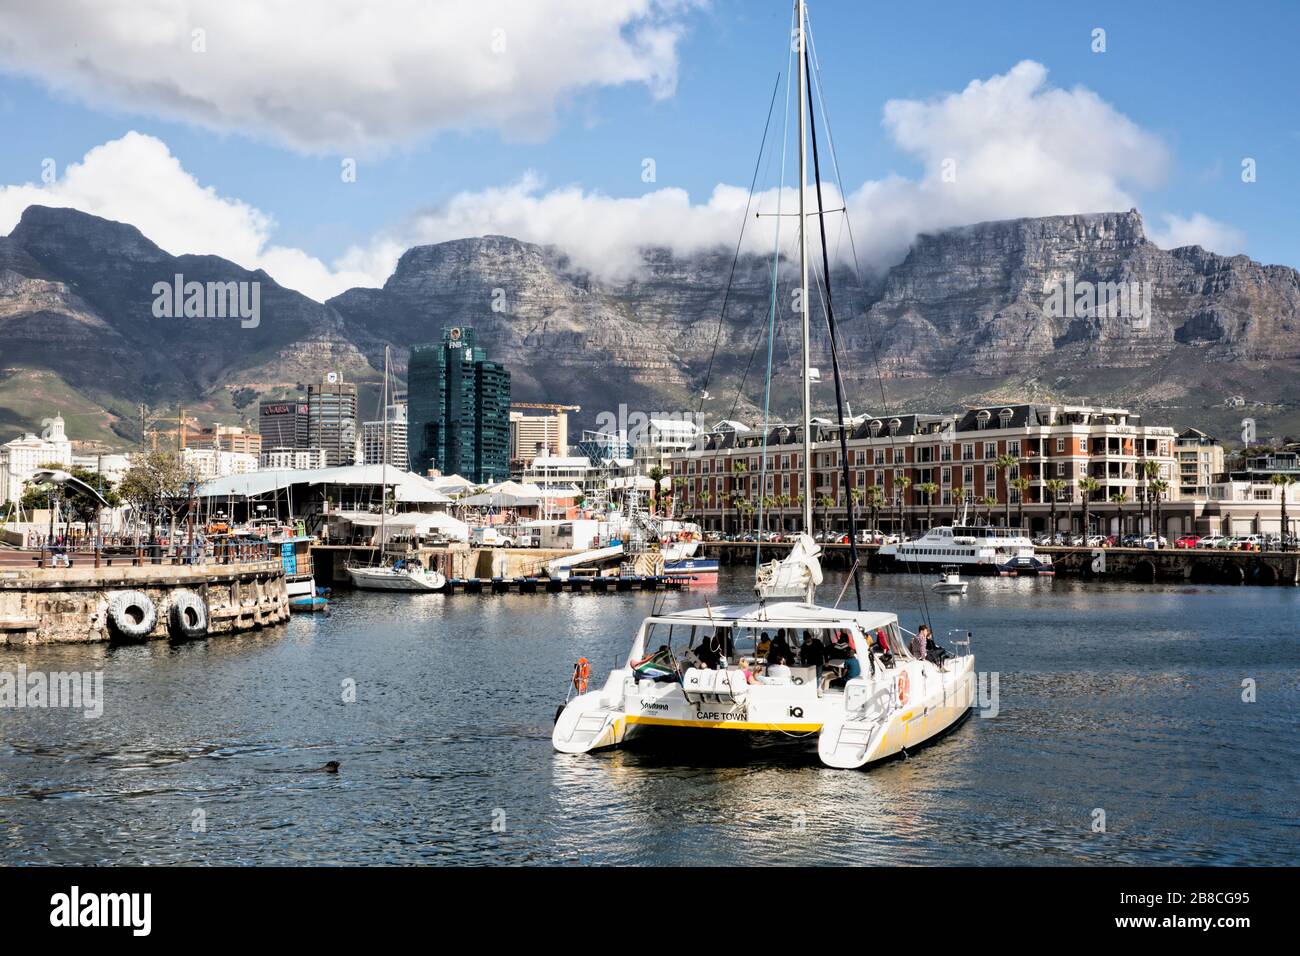 A catamaran loaded with tourists sails towards the Cape Grace Hotel on the V & A Waterfront while Table Mountain looks down at the city from behind Stock Photo